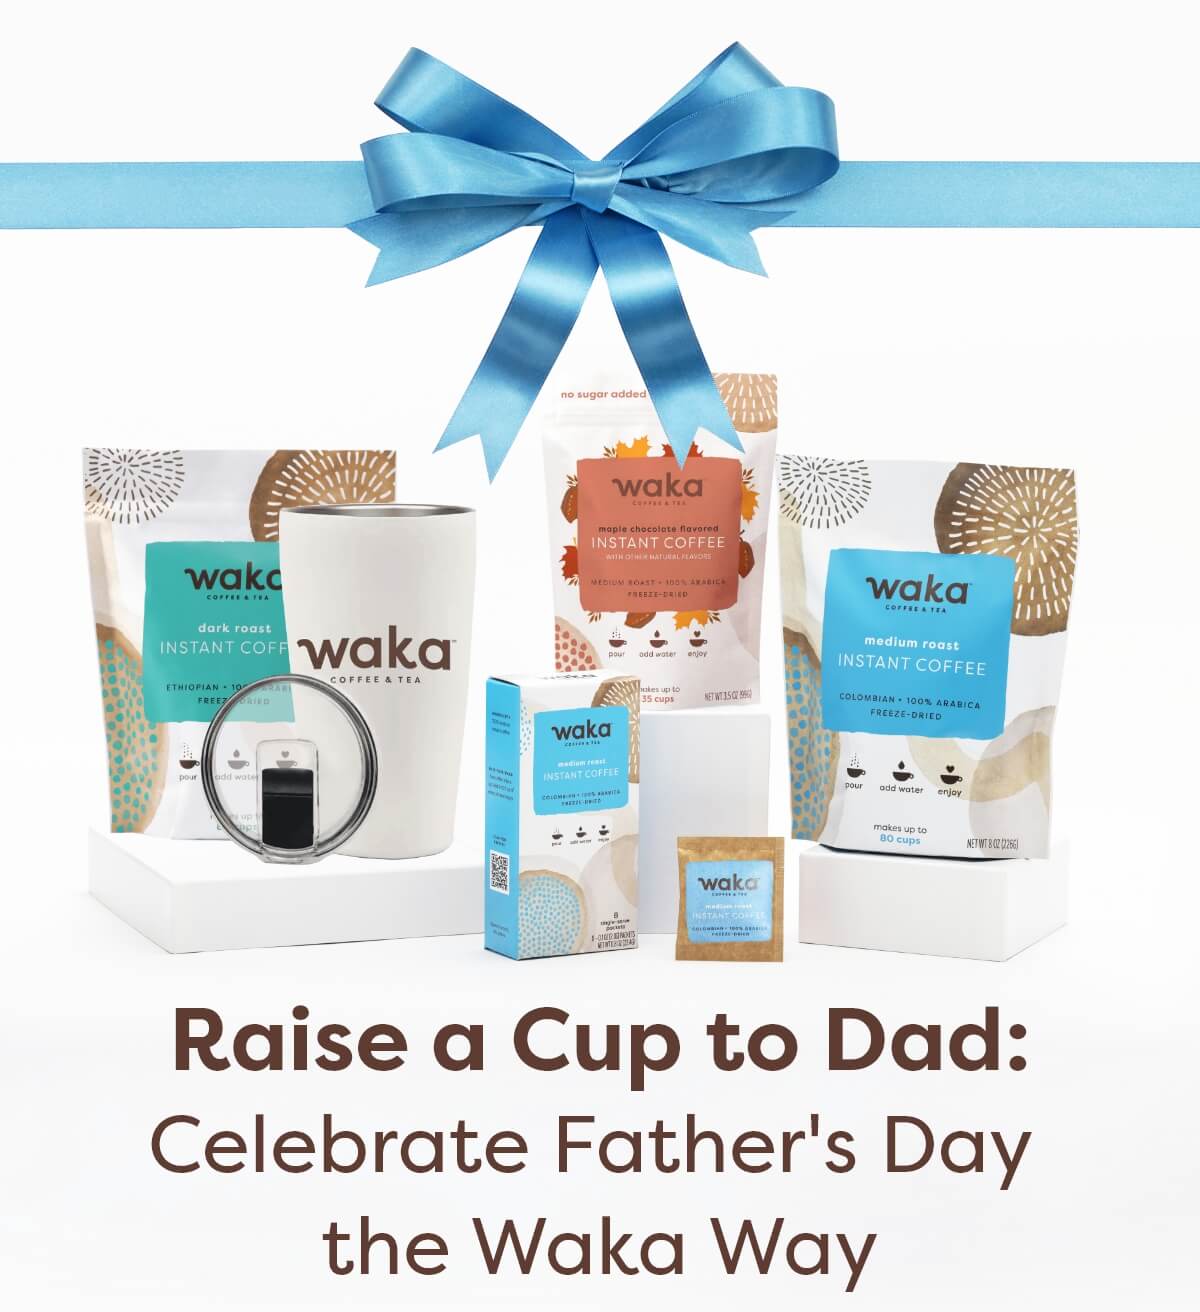 Raise a Cup to Dad: Celebrate Father's Day the Waka Way